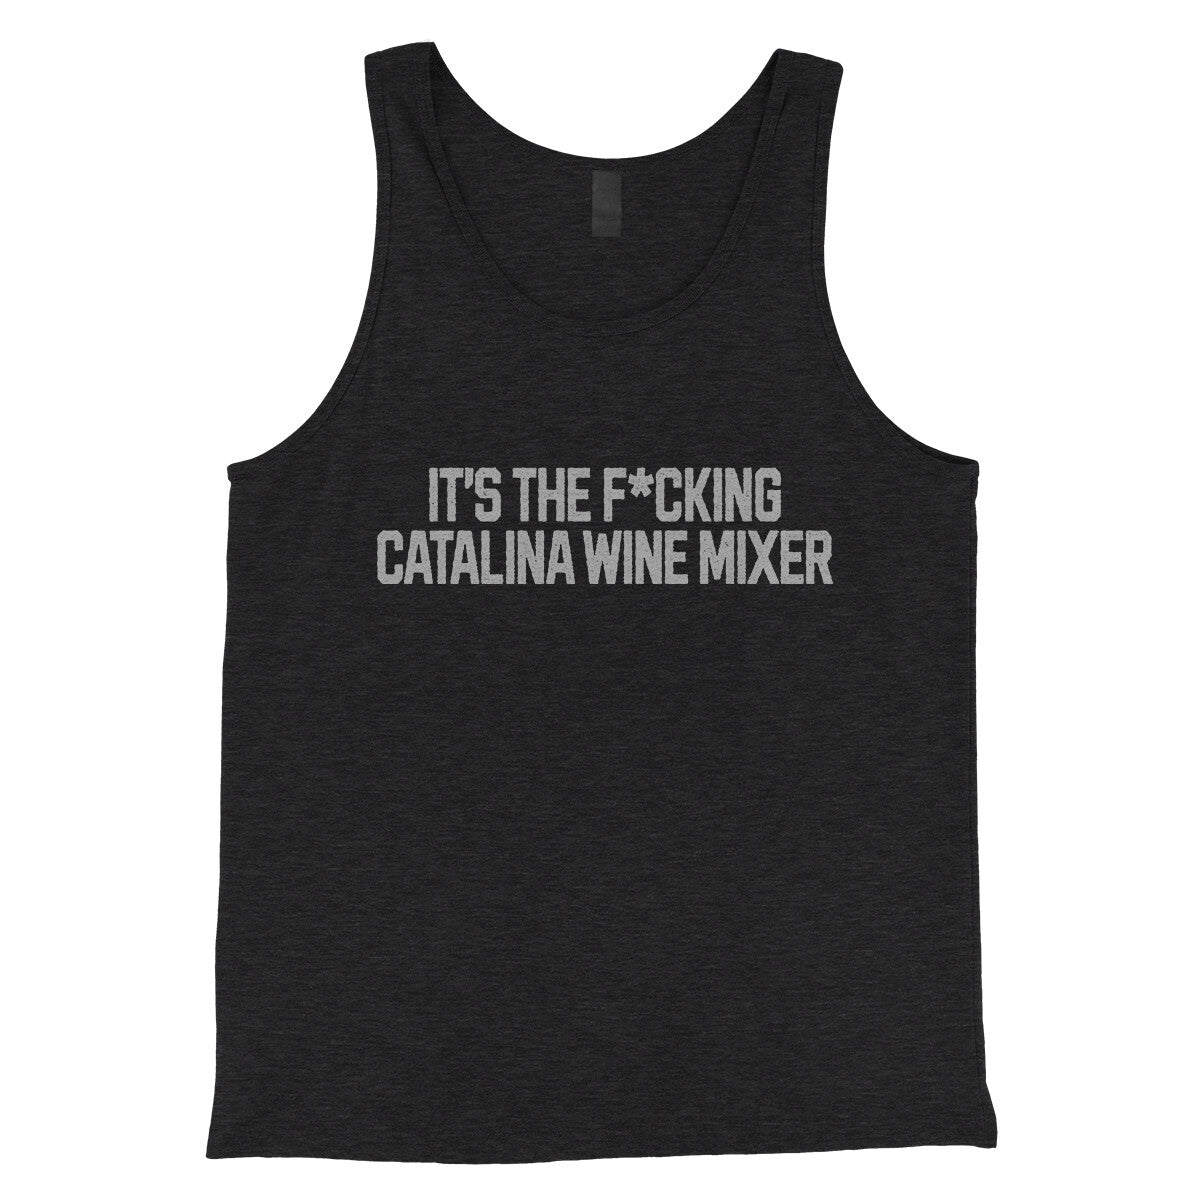 It's the Fucking Catalina Wine Mixer in Charcoal Black TriBlend Color